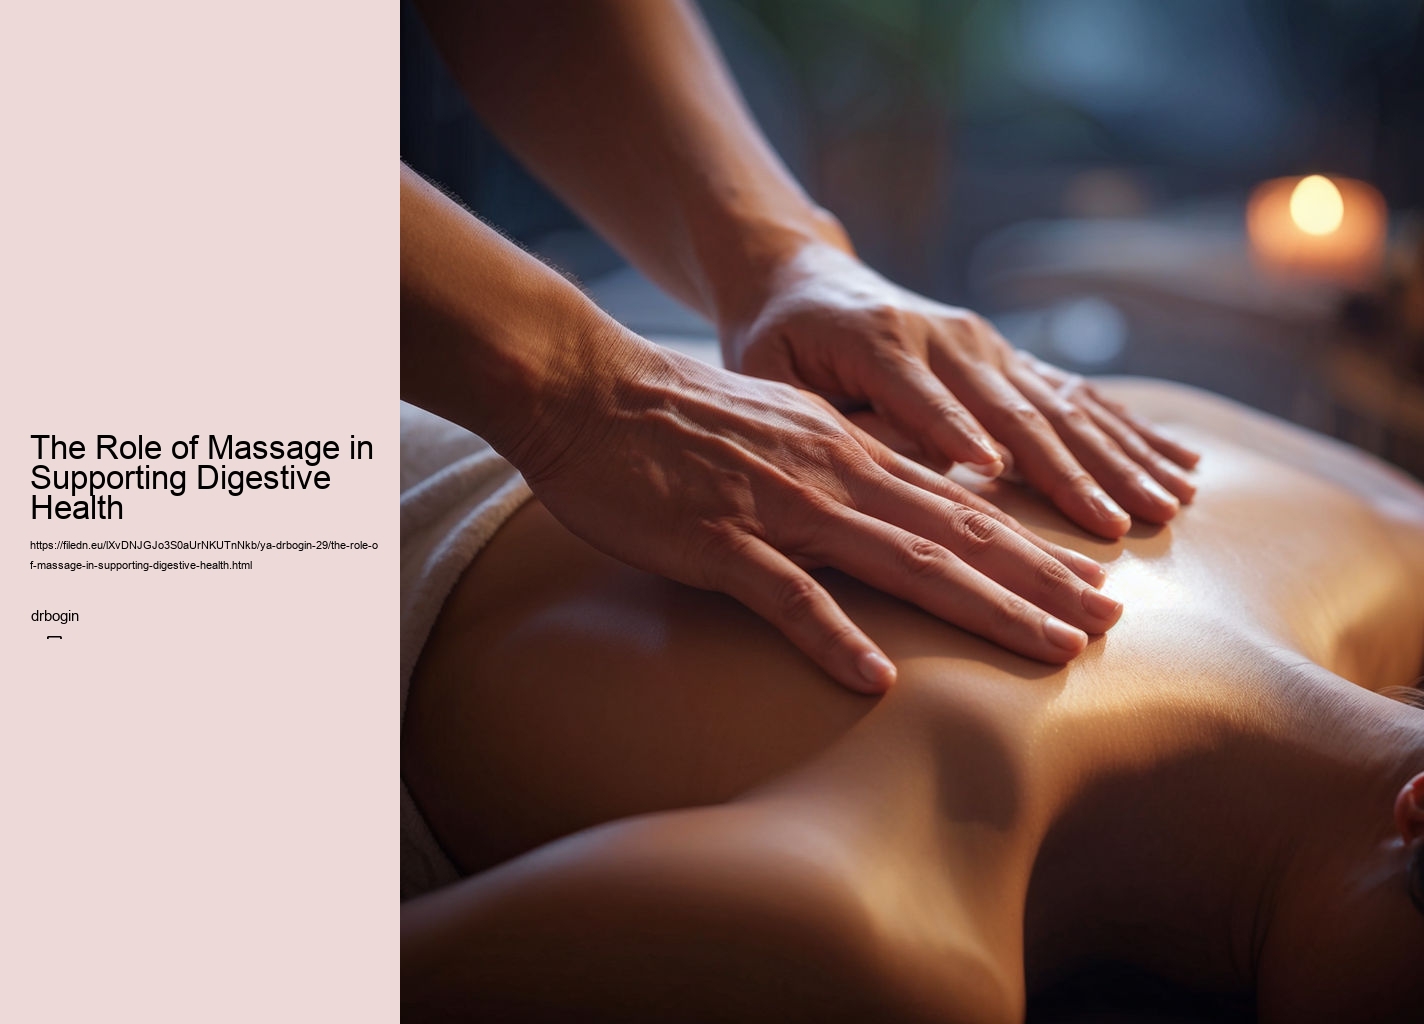 The Role of Massage in Supporting Digestive Health